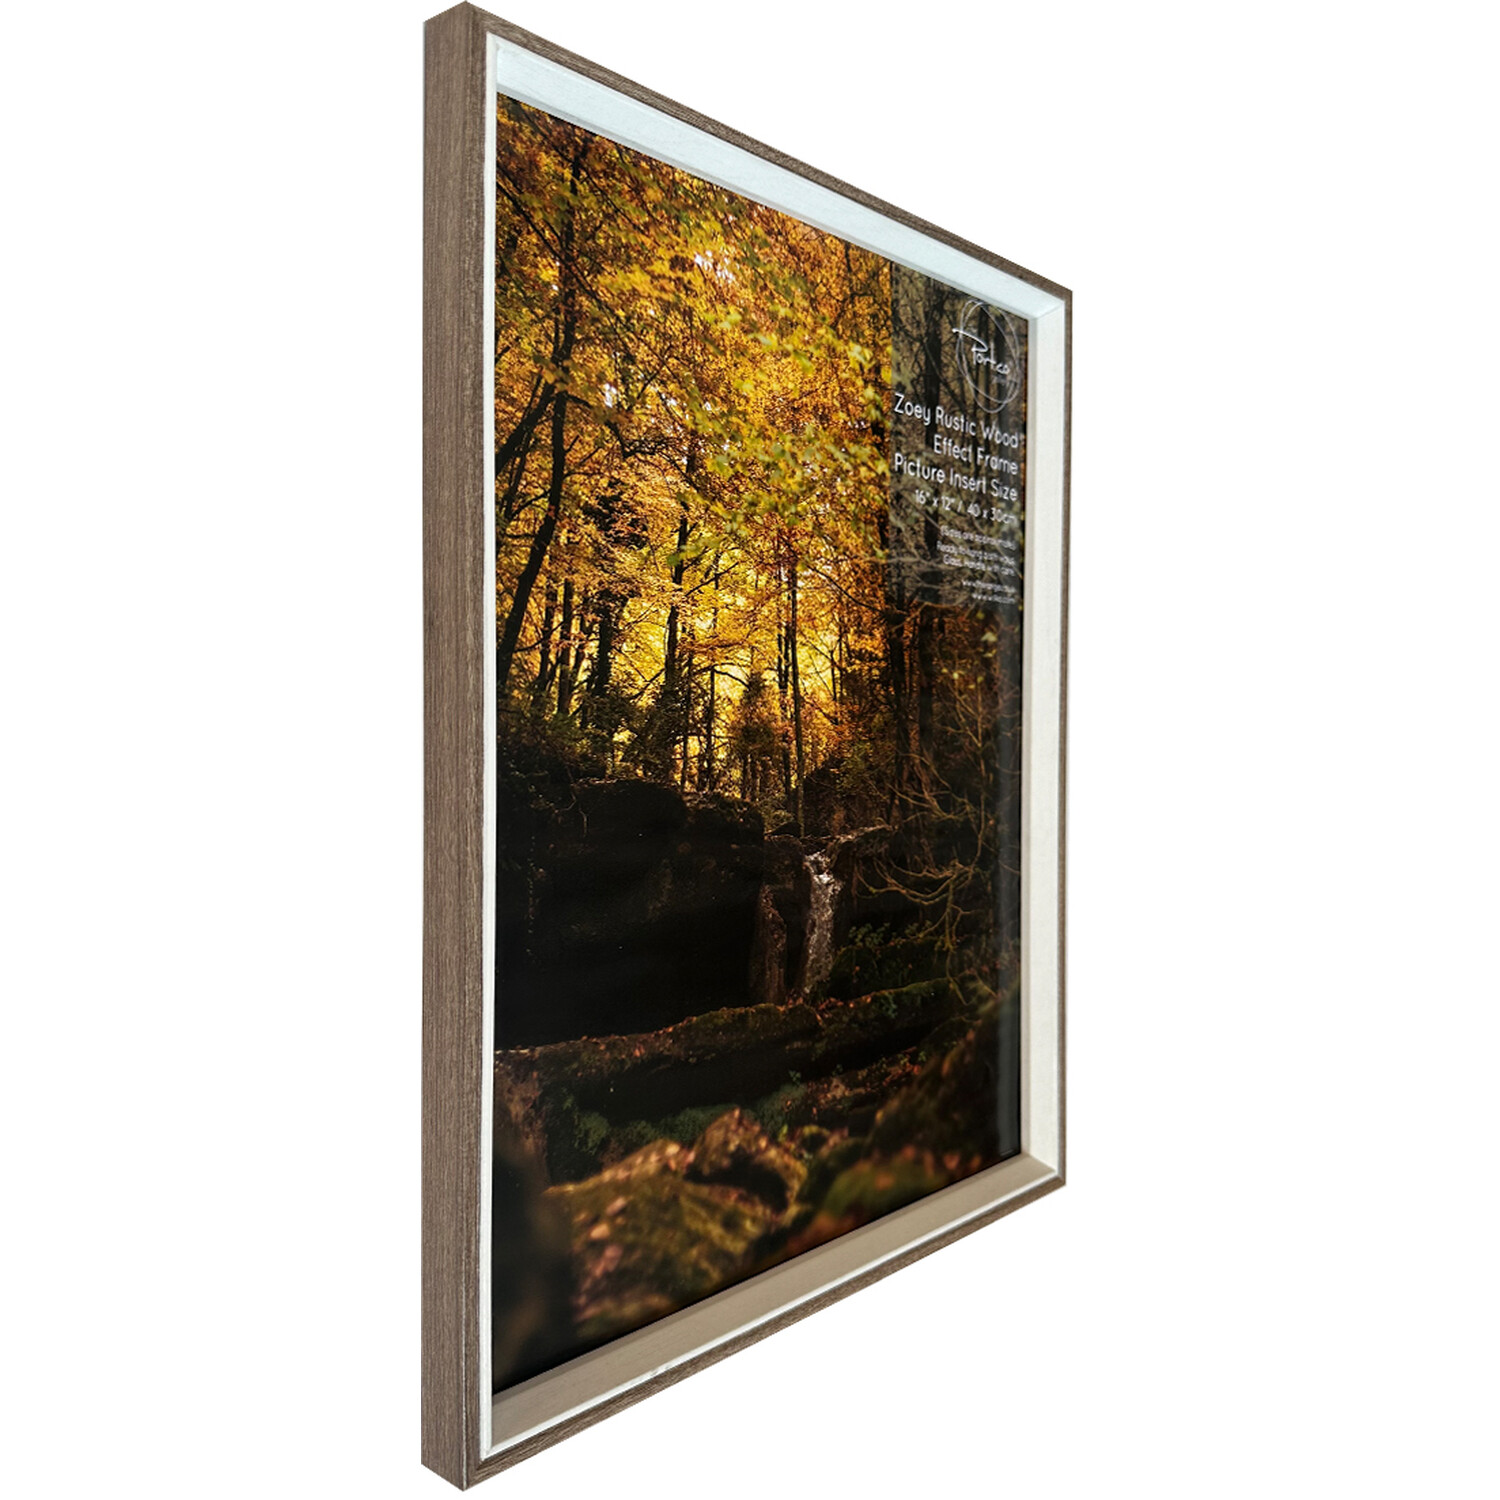 Zoey Rustic Wood Effect Frame - Brown / 16x12in Image 2